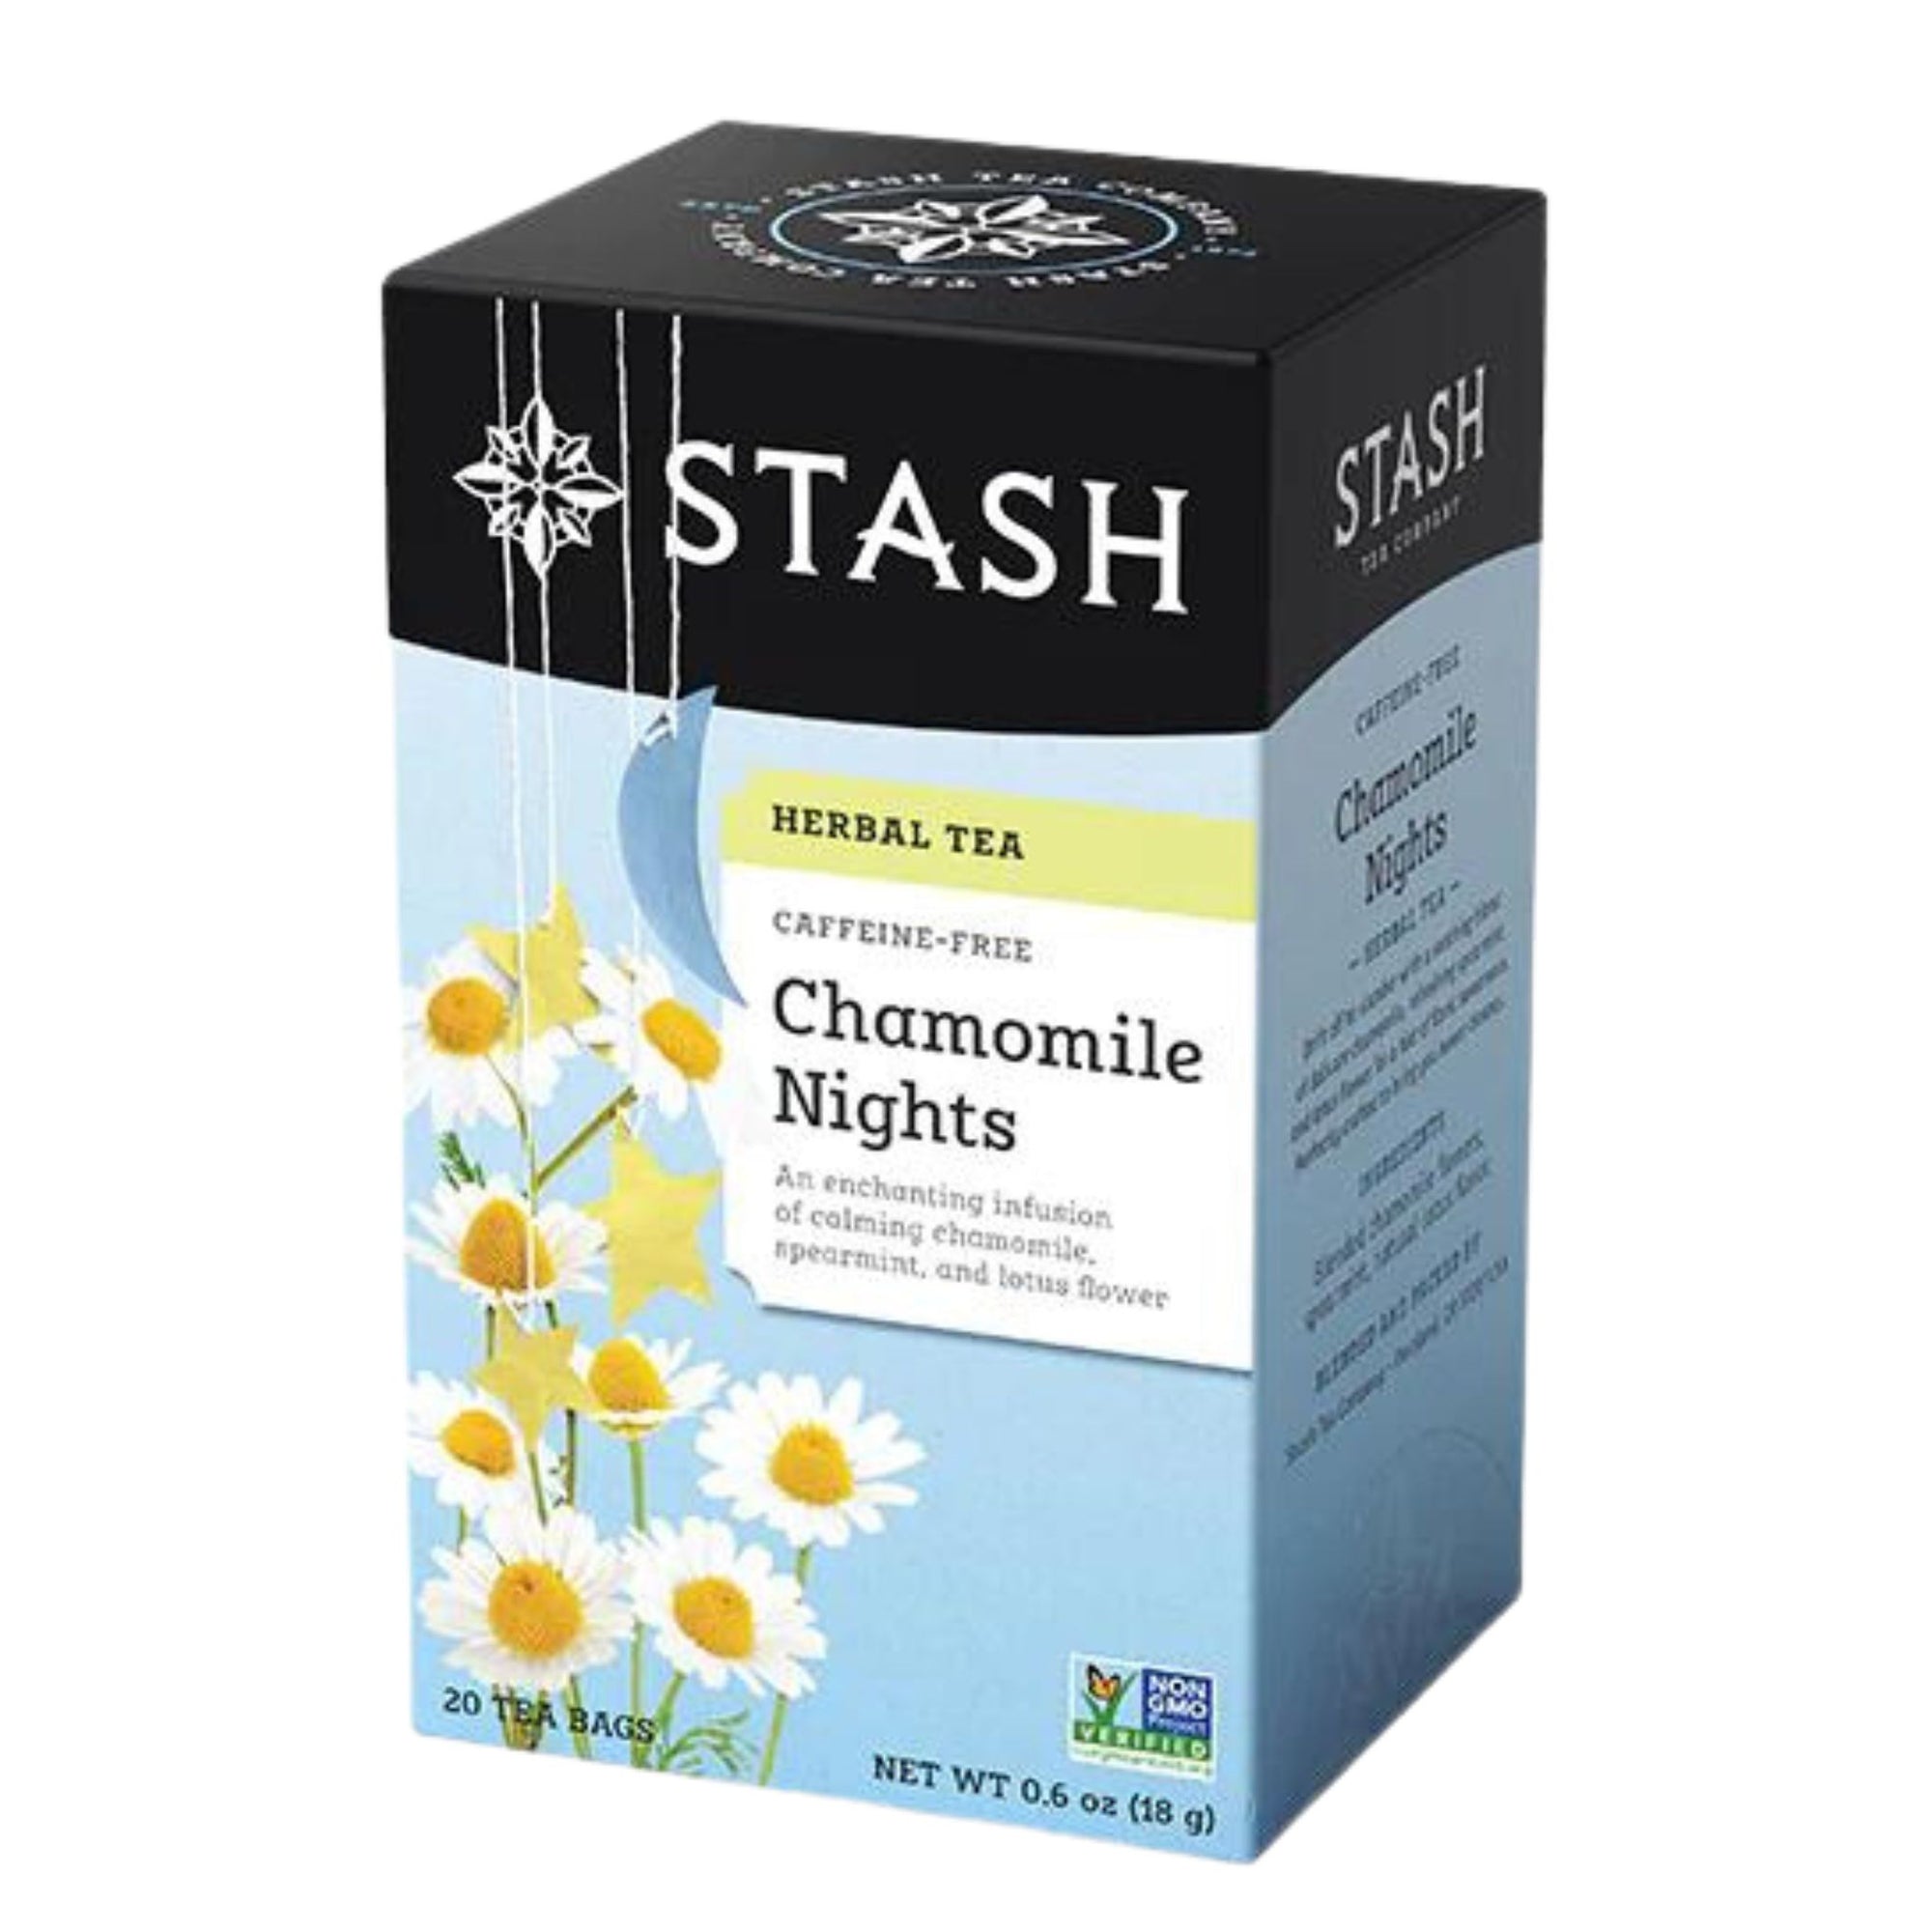 Stash Chamomile Nights Herbal Tea - 20 tea bags in a box - An enchanting infusion of calming chamomile, spearmint, and lotus flower. 